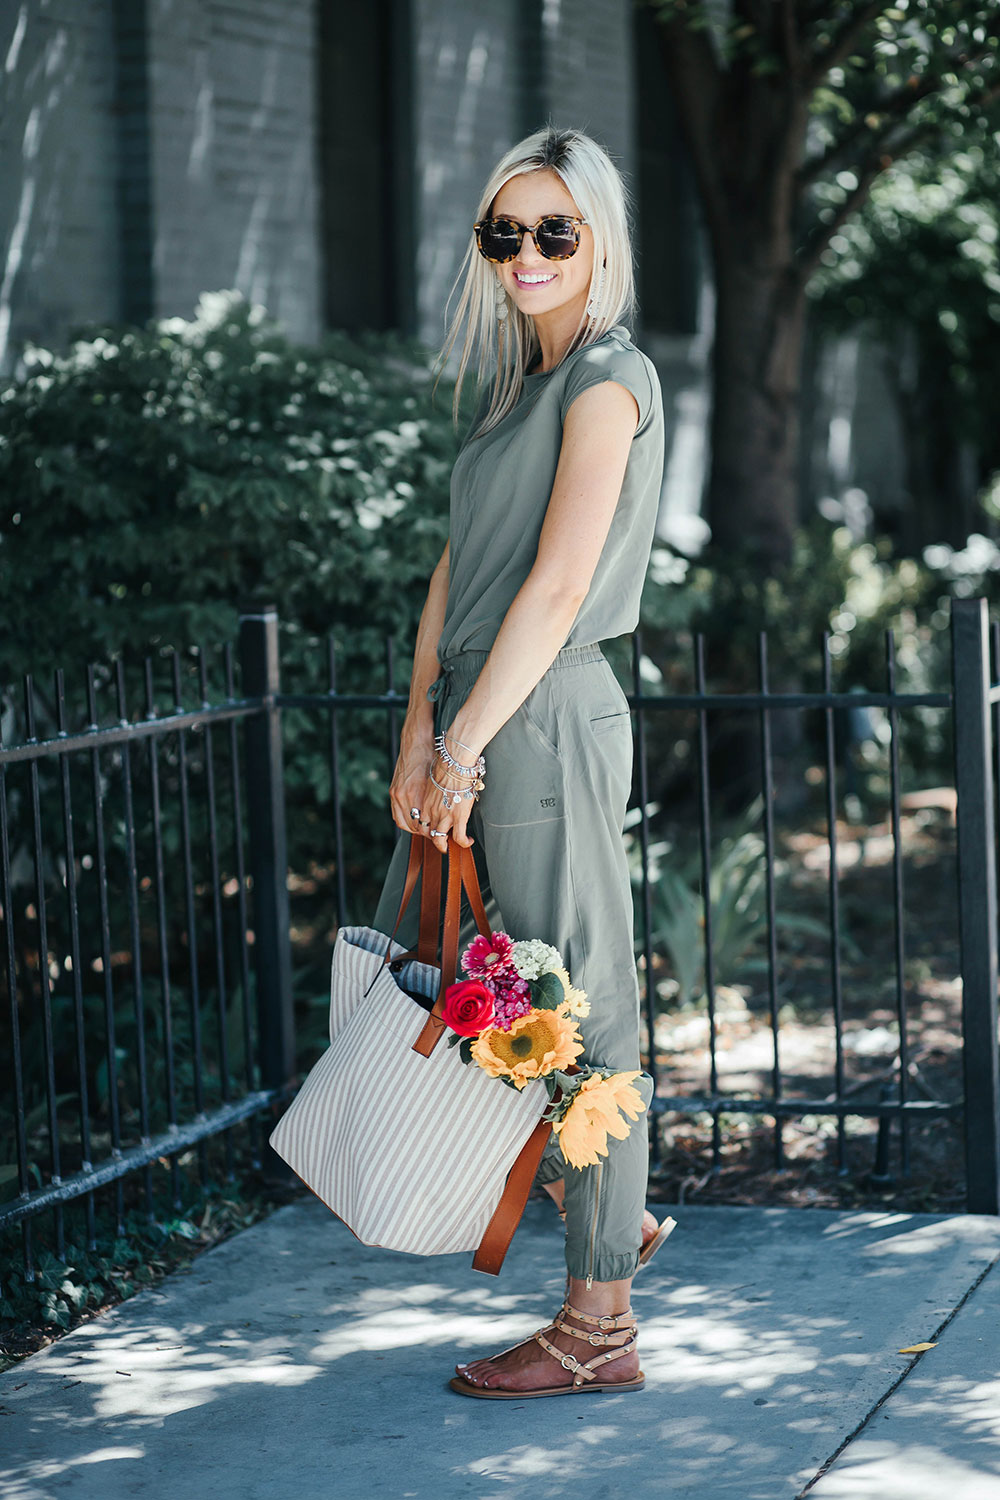 How to wear a jumpsuit 4 ways | summer outfit ideas | what to wear to a farmers market | how to style a jumpsuit | Little Miss Fearless